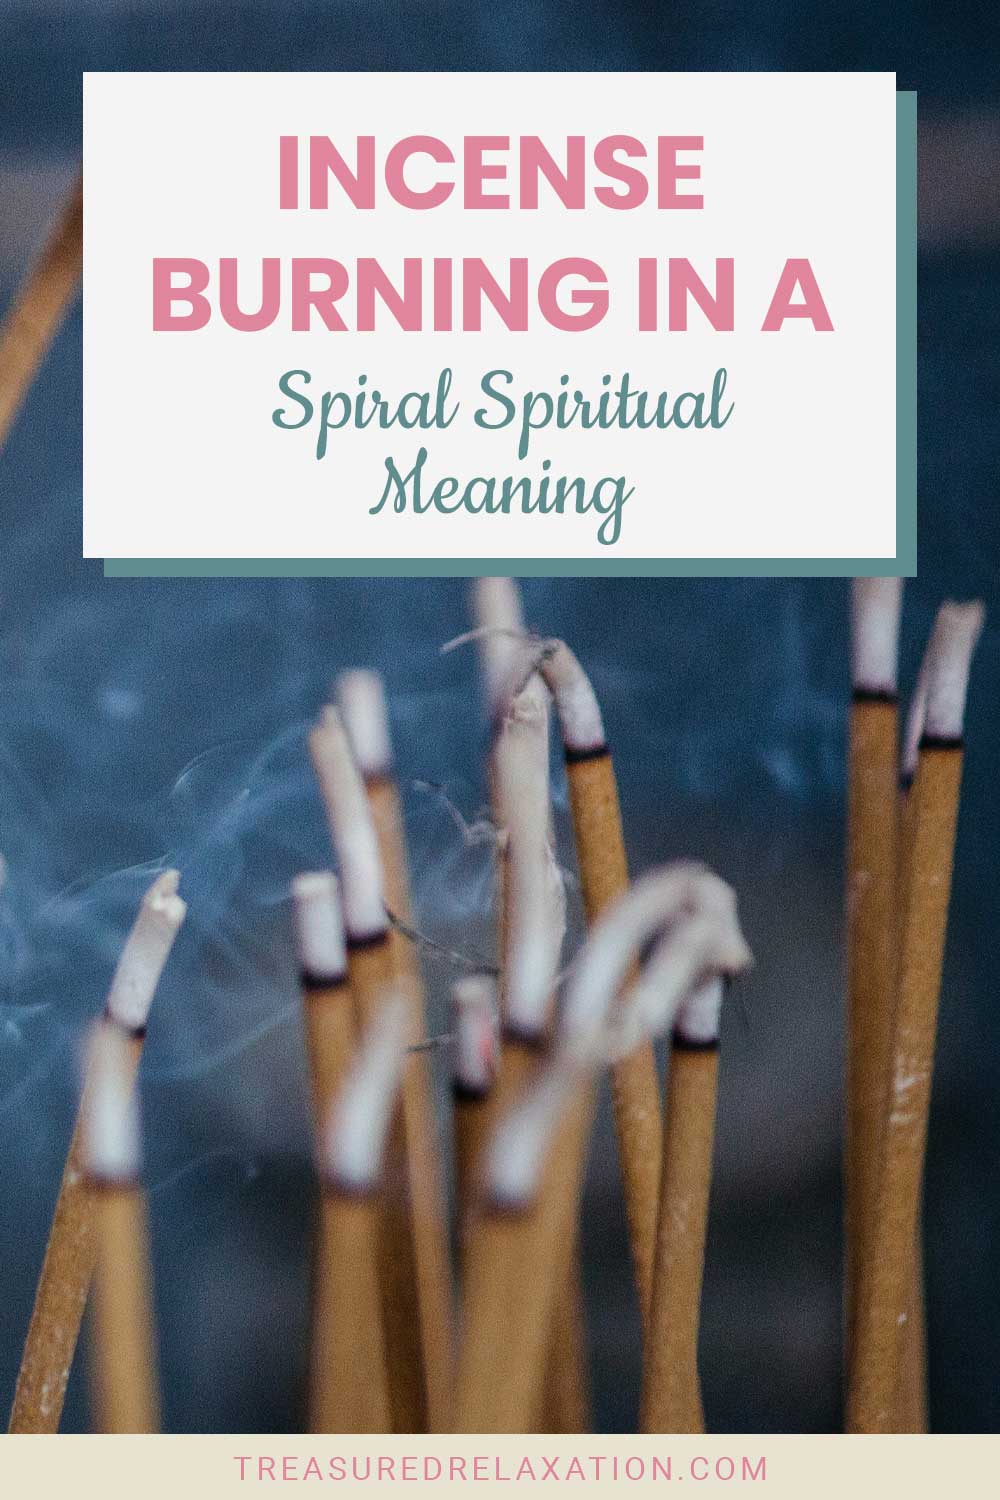 Incense Burning in a Spiral Spiritual Meaning